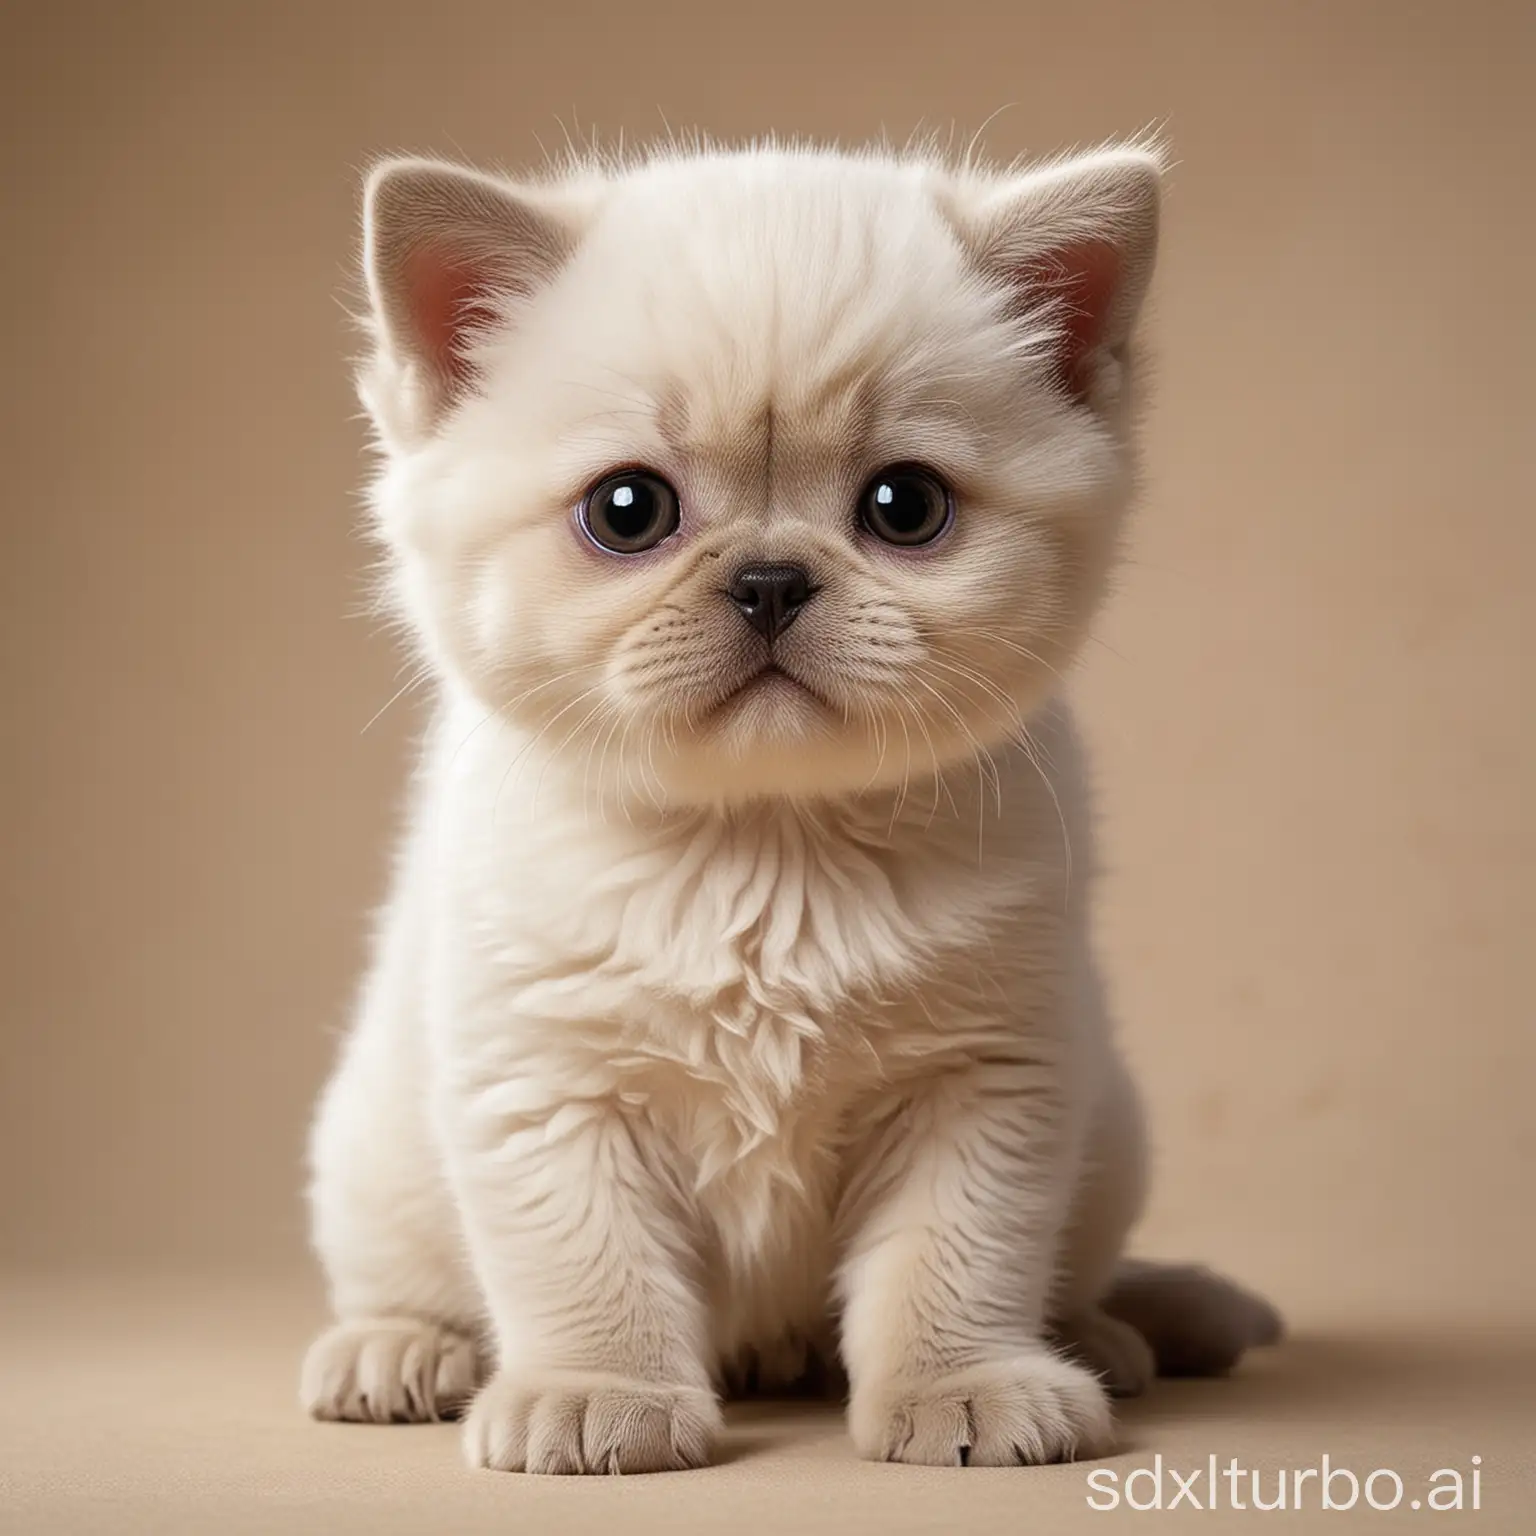 A kitten-like creature with a round face and large, expressive eyes like a British Shorthair cat. Its fur is short and plush, colored a creamy white like the cat breed.
However, it has floppy ears hanging down like a King Charles Spaniel dog. Its body is compact like a cat but with slightly longer legs reminiscent of the dog breed.
The hybrid kitten has a short snout and a small black nose. Its expression is inquisitive and friendly, with a hint of the gentle demeanor associated with both parent breeds.
The lighting is soft and warm, highlighting the kitten's unique features against a slightly blurred background. The overall image conveys a sense of whimsy and the unexpected blending of feline and canine traits into an imaginative new "breed."